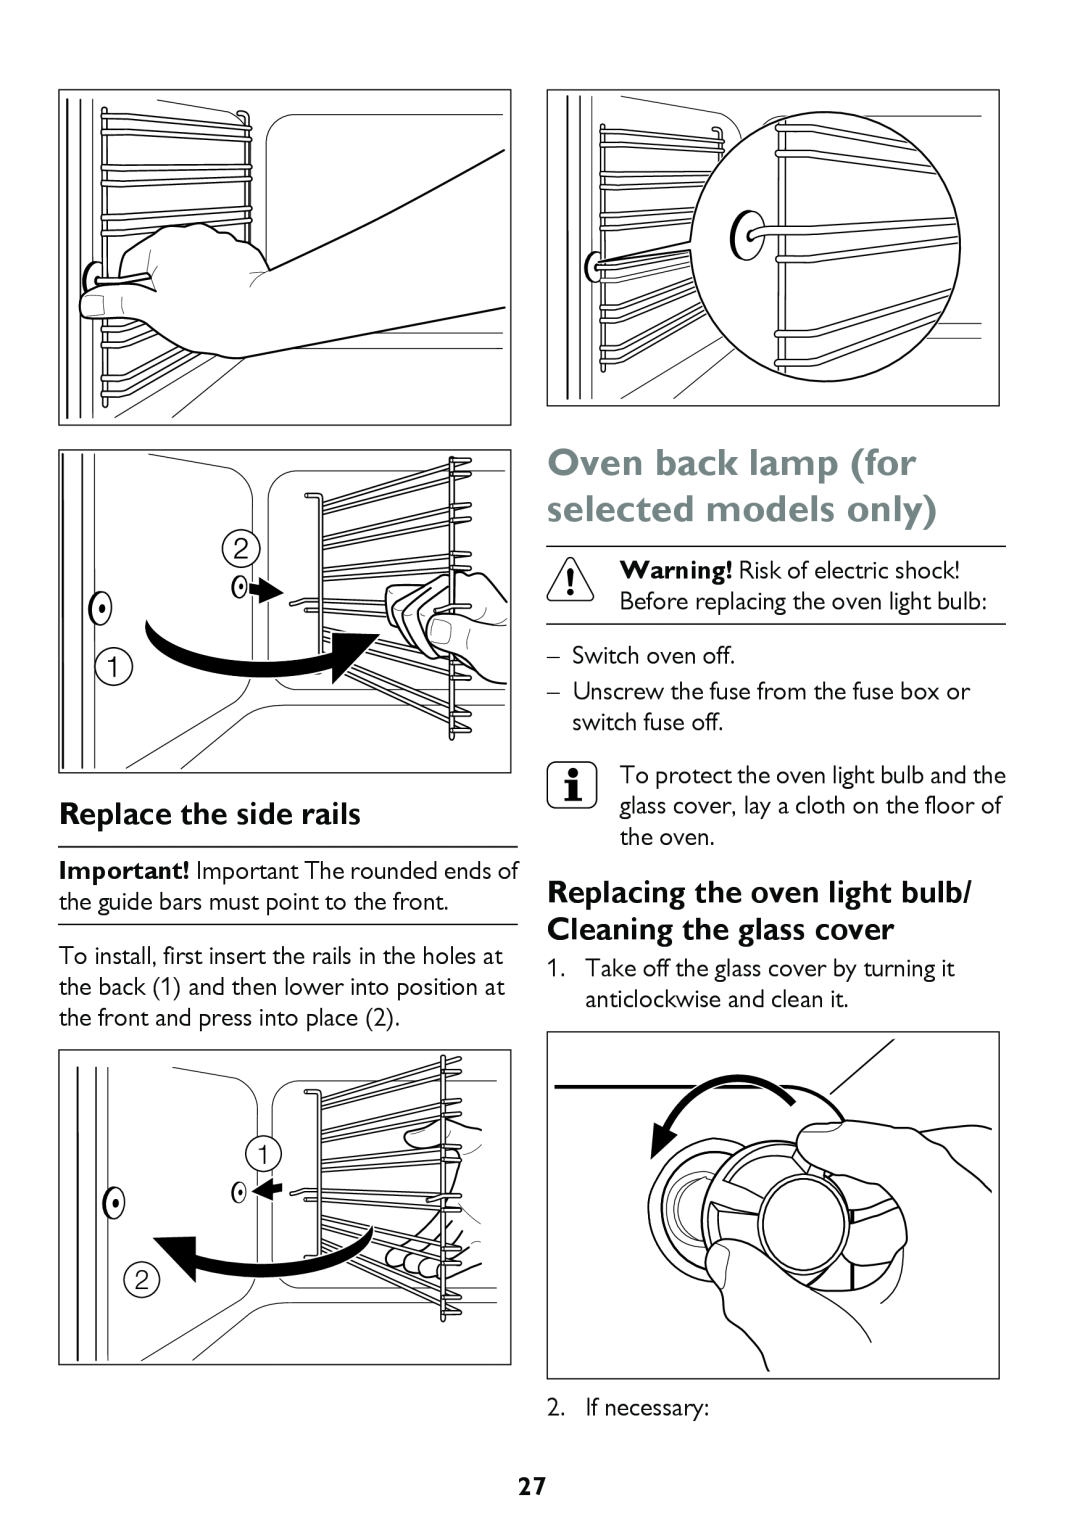 John Lewis JLBIDO913 instruction manual Oven back lamp for selected models only, Replace the side rails 